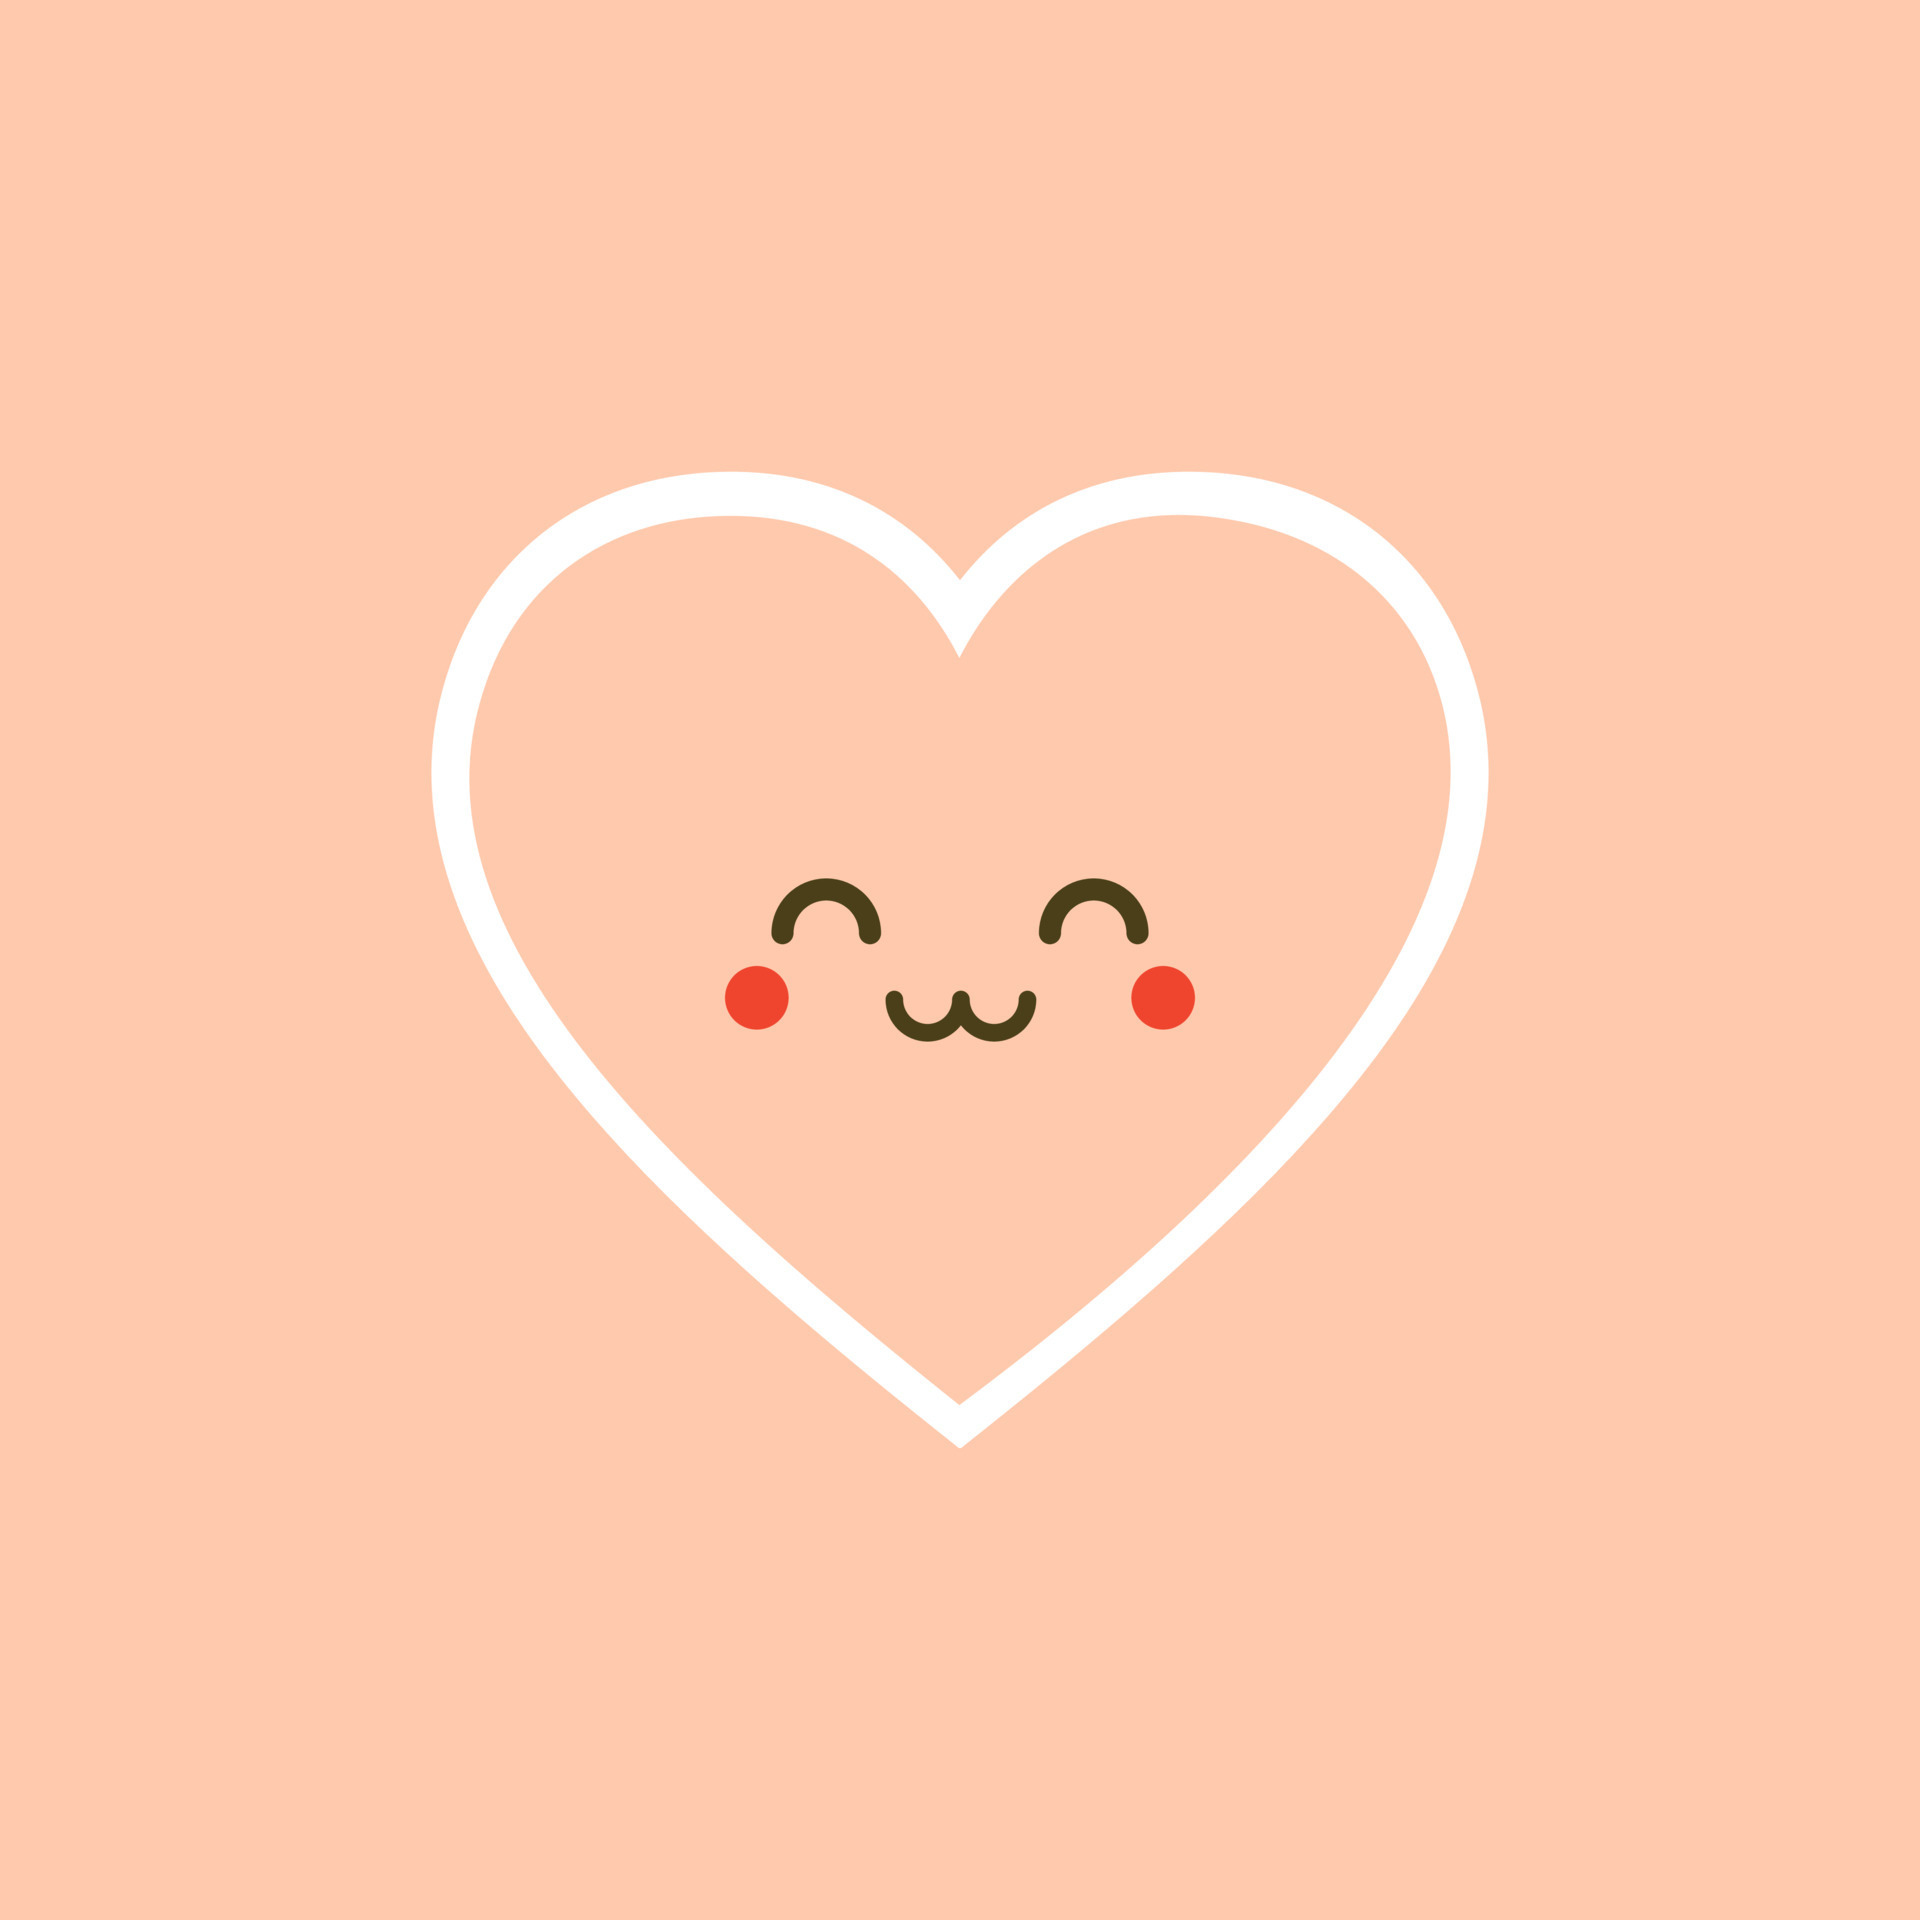 Cute set of holiday Valentines day funny cartoon character of emoji hearts.  Vector illustration of cute and kawaii heart. Art design for Valentine's  Day greetings and card, web, banner, love symbol 7644486